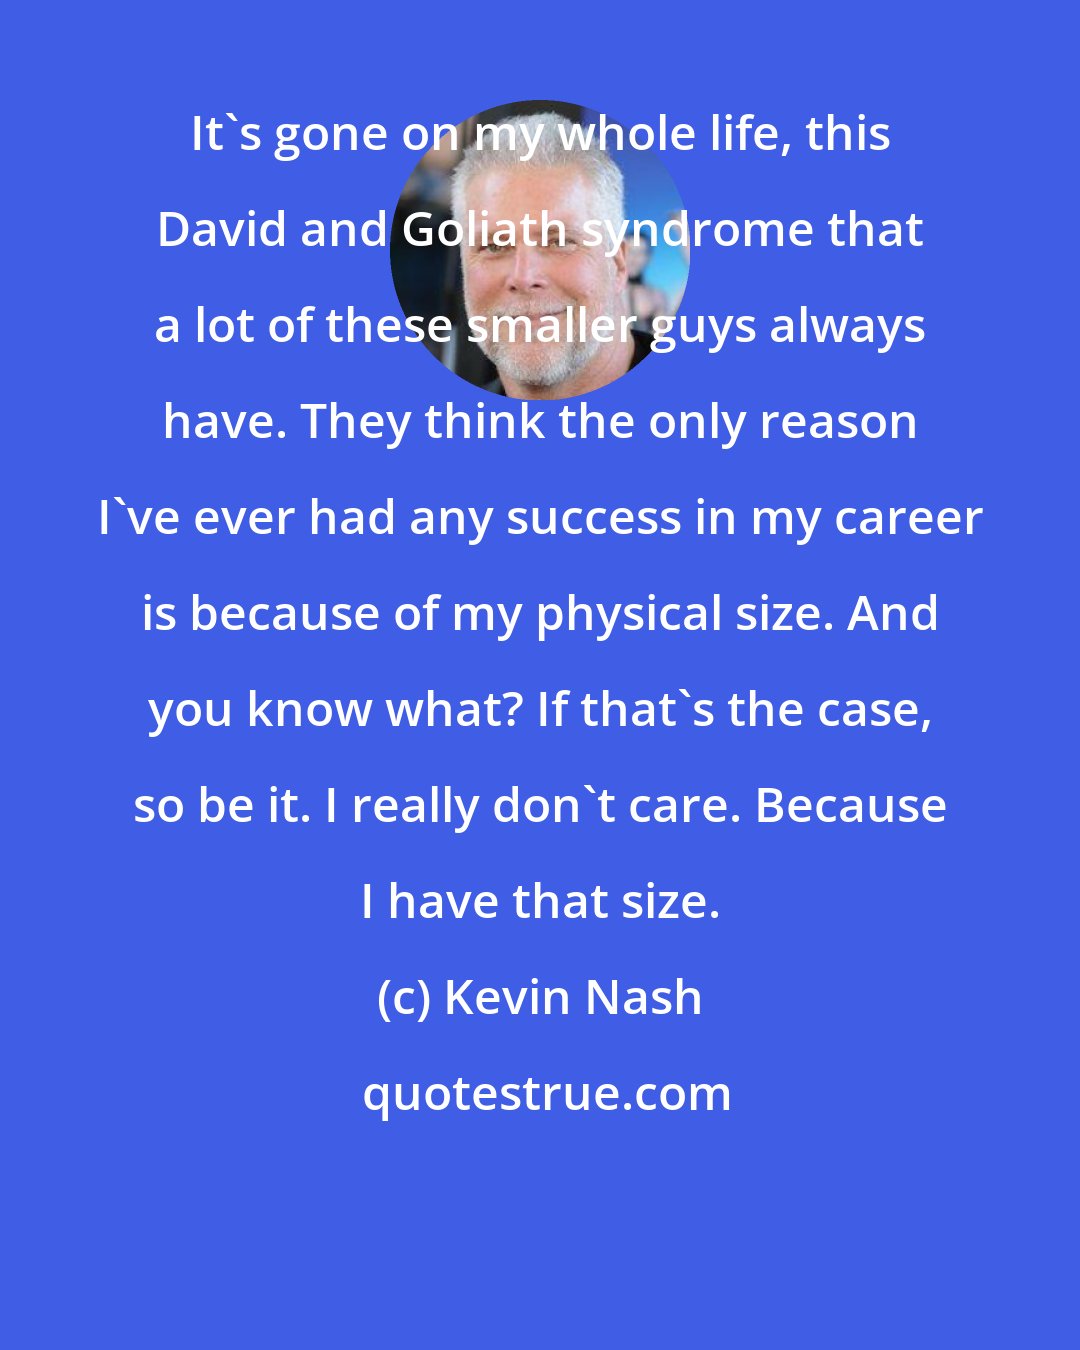 Kevin Nash: It's gone on my whole life, this David and Goliath syndrome that a lot of these smaller guys always have. They think the only reason I've ever had any success in my career is because of my physical size. And you know what? If that's the case, so be it. I really don't care. Because I have that size.